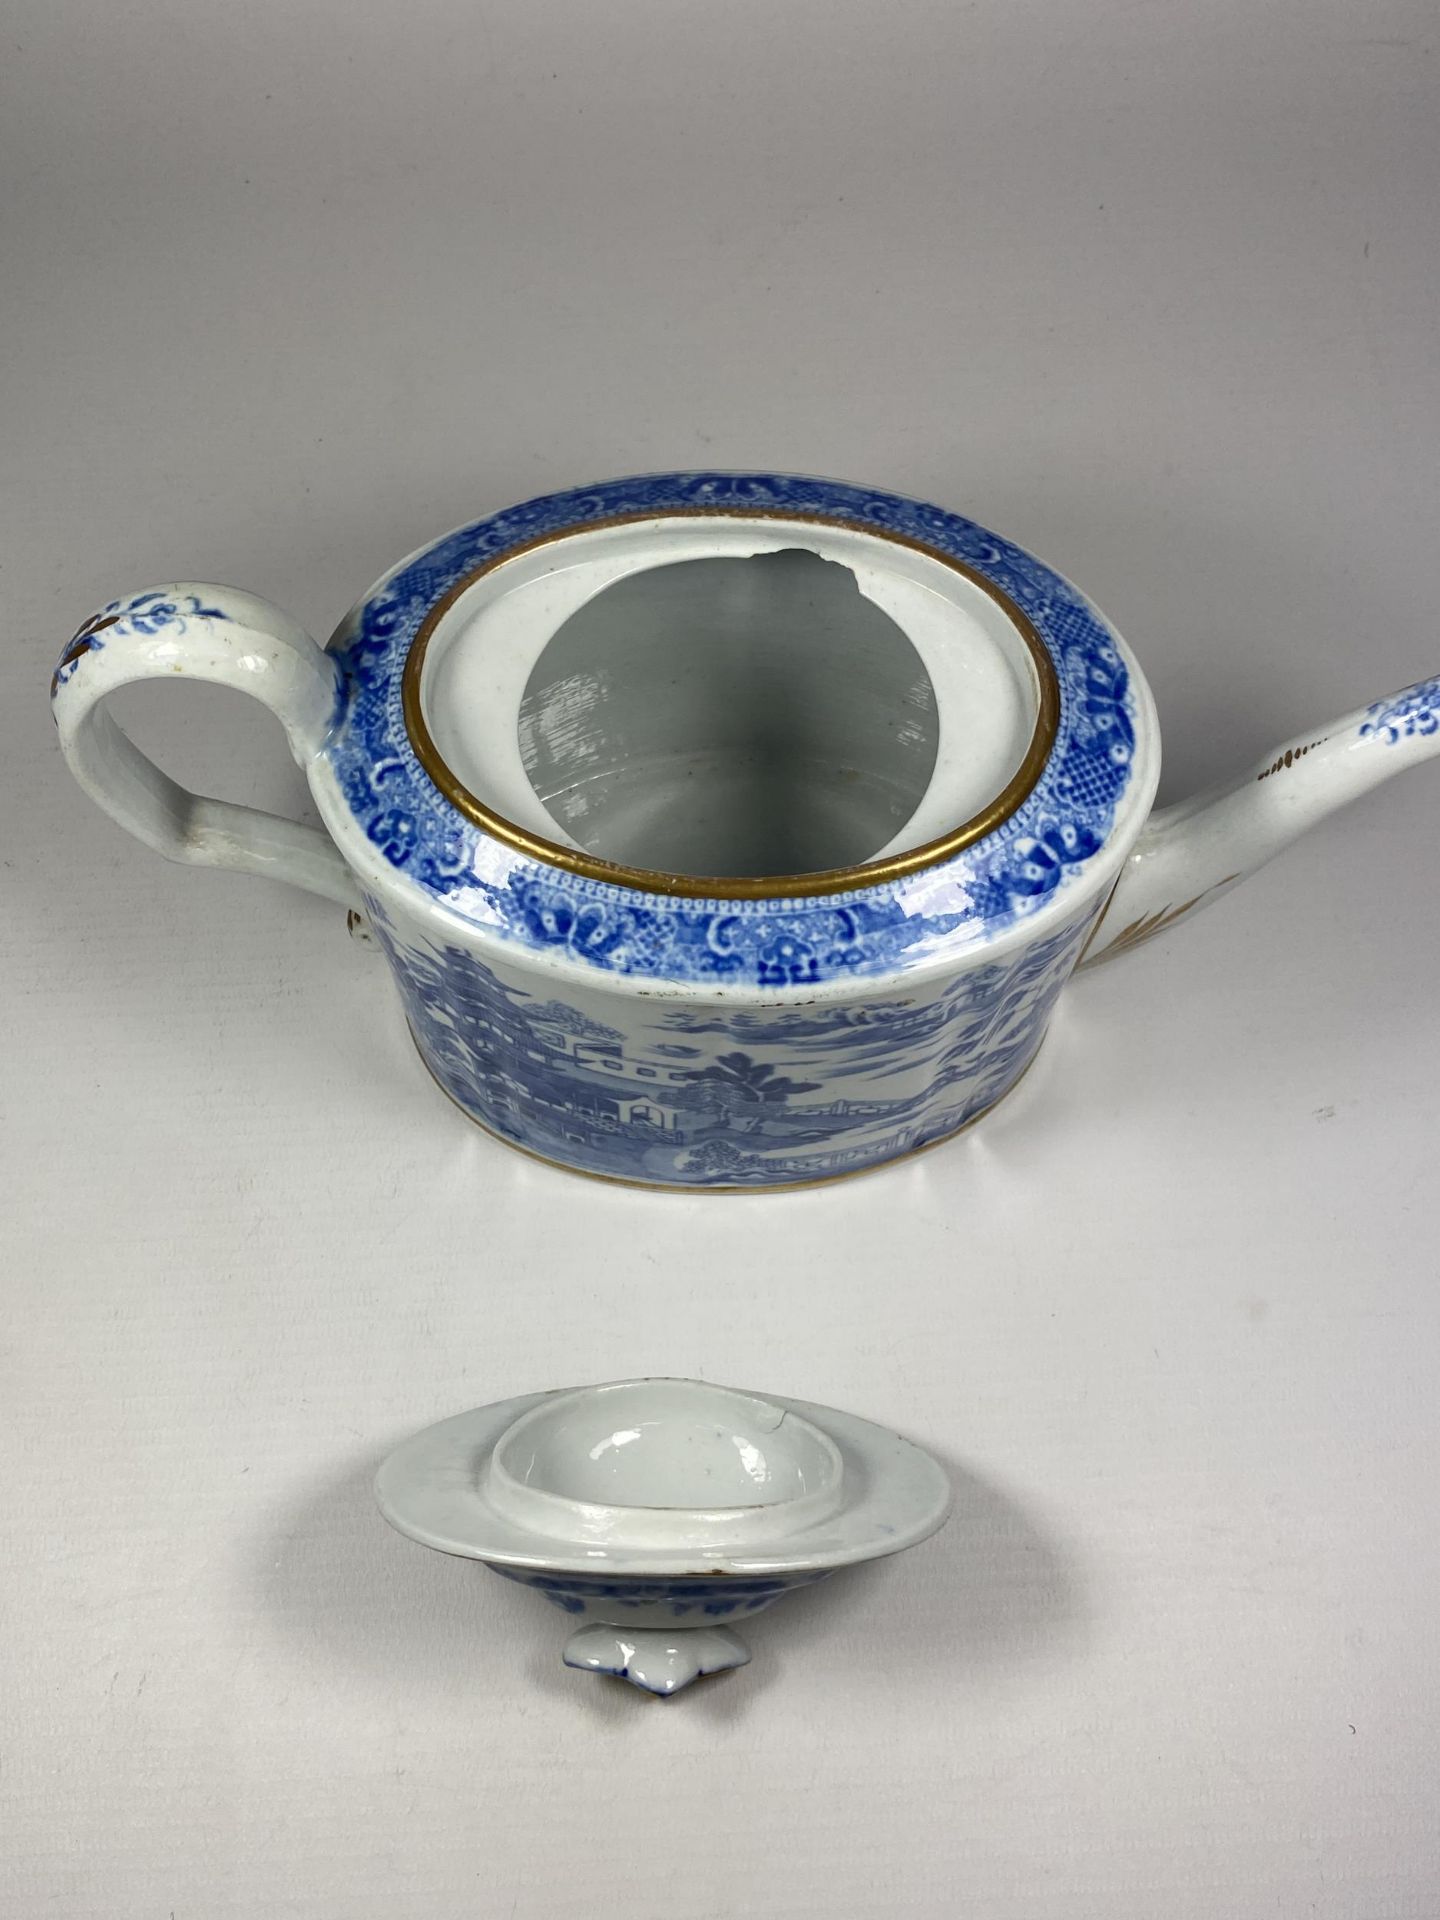 A CHINESE QING BLUE & WHITE EXPORT PORCELAIN TEAPOT WITH PAGODA DESIGN, HEIGHT 15CM - Image 3 of 6